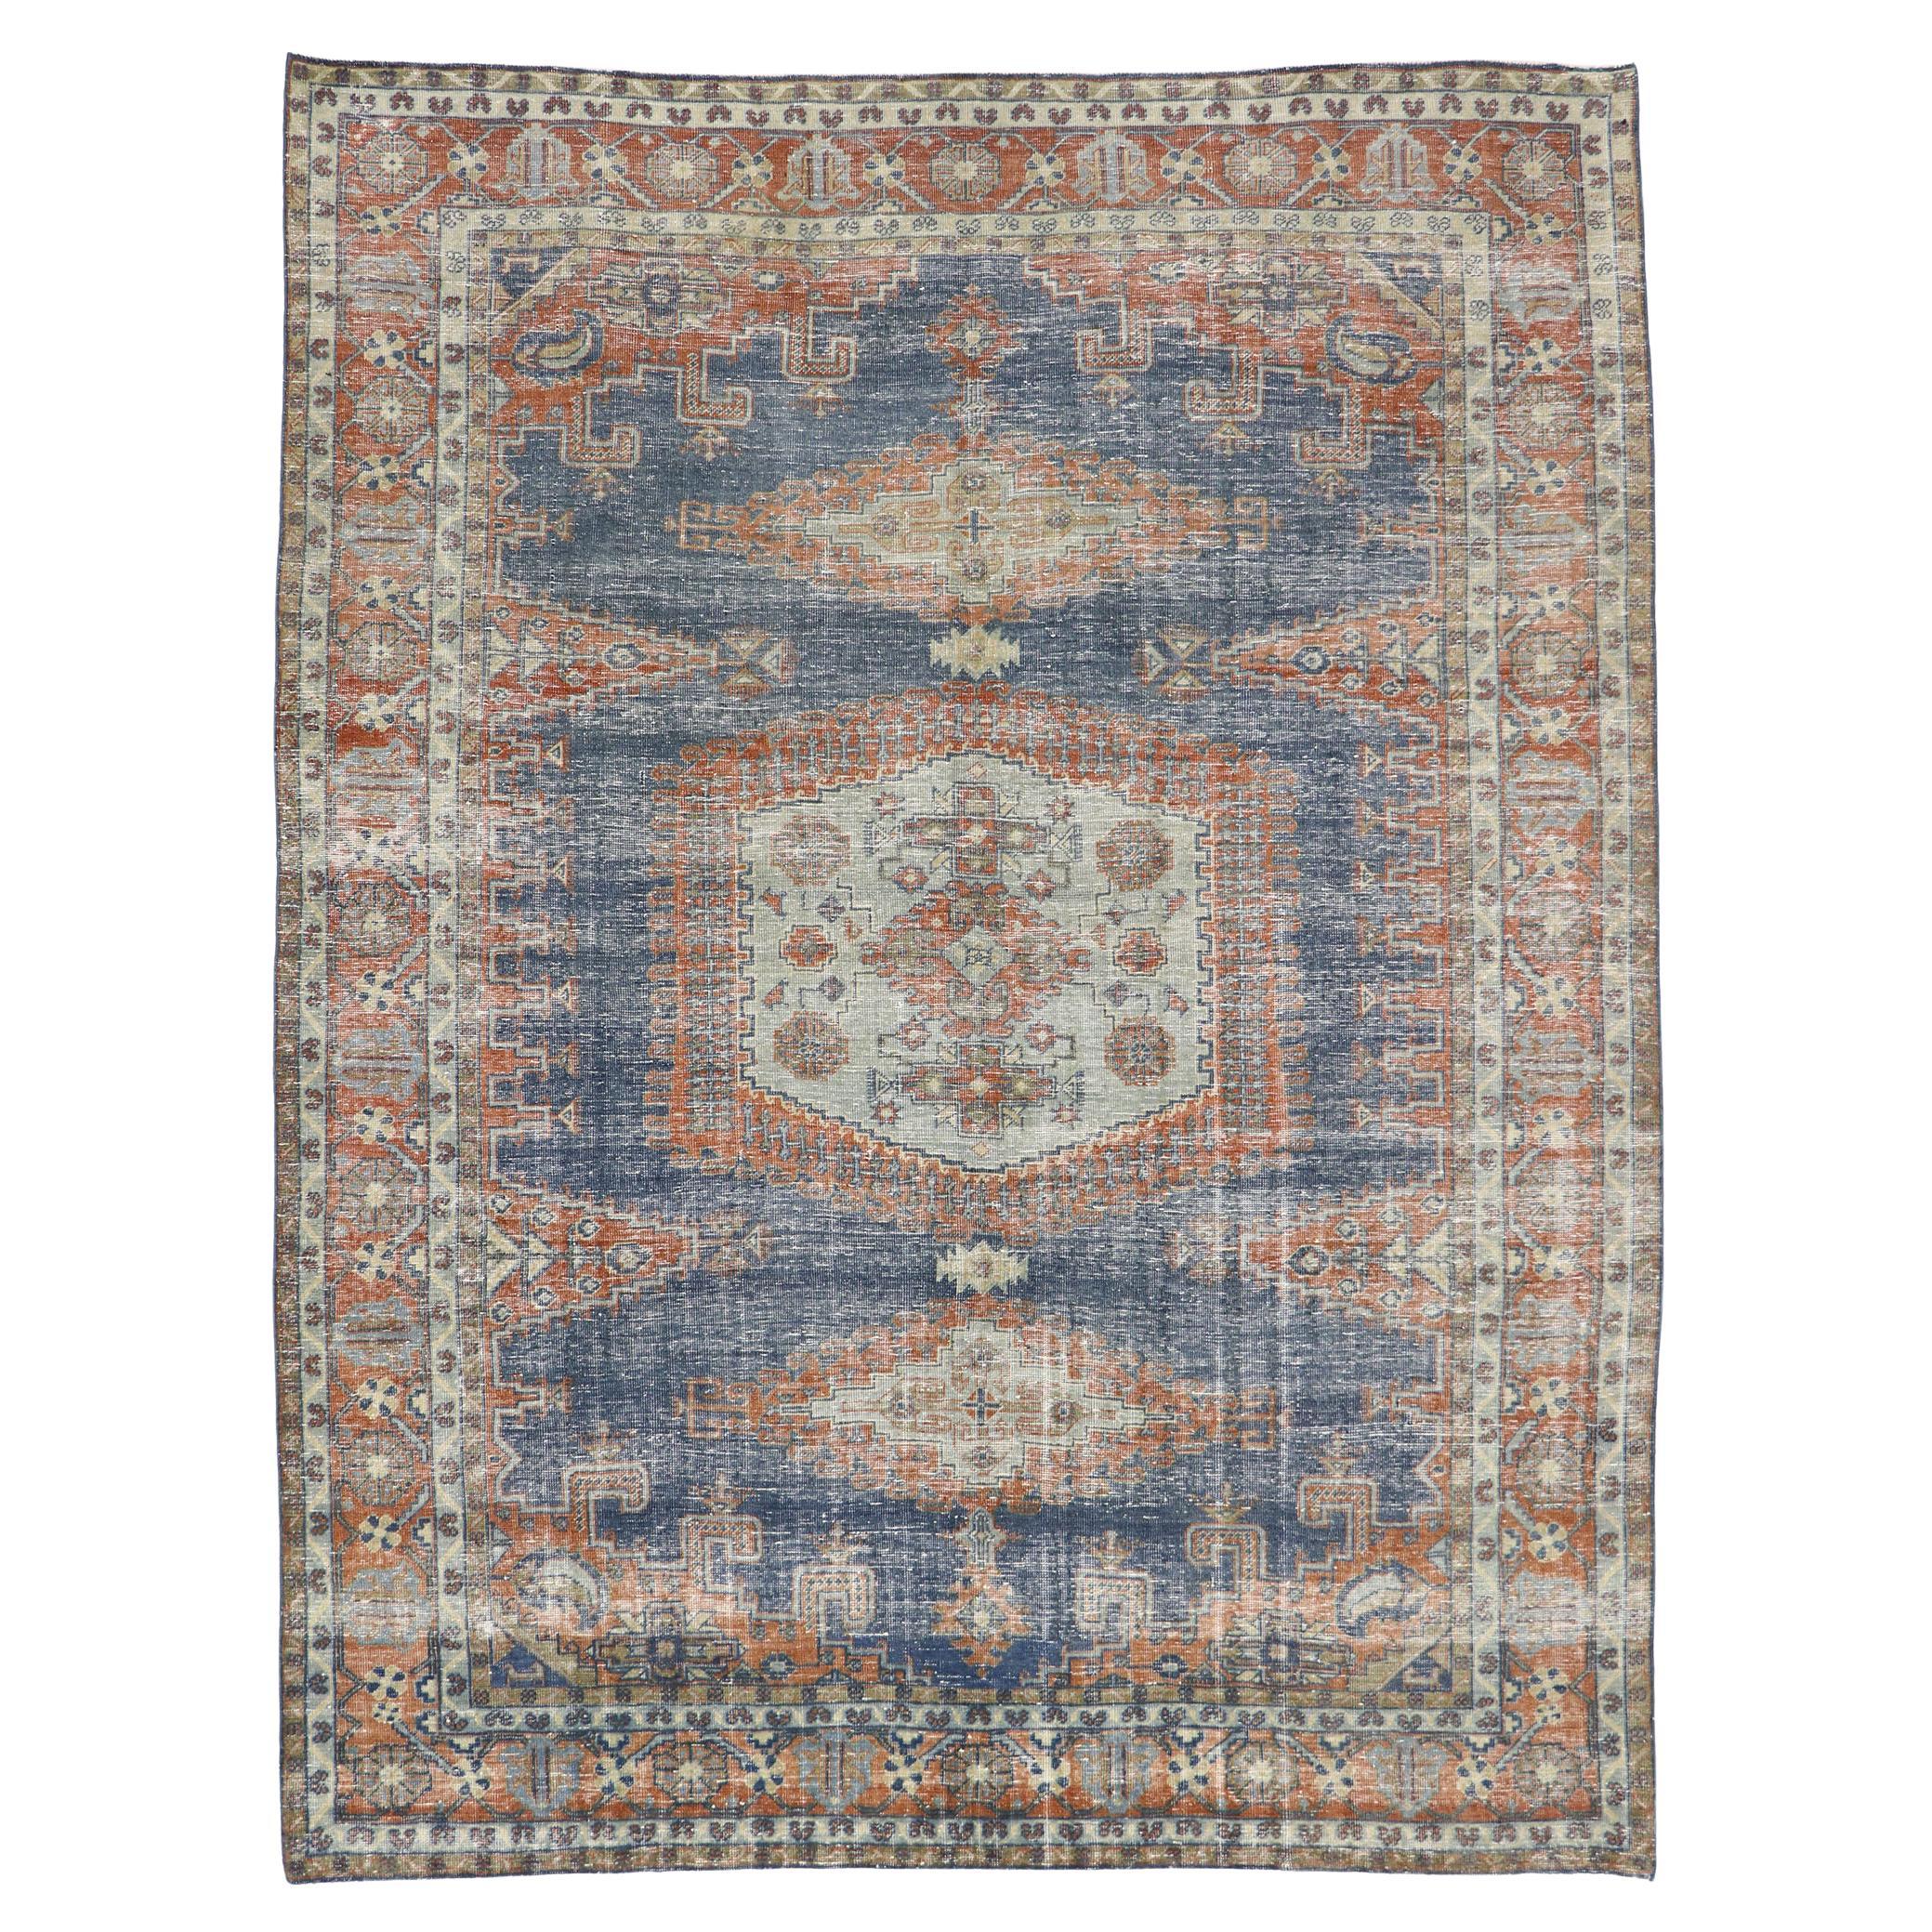 Distressed Vintage Persian Viss Rug with Rustic Tribal Style